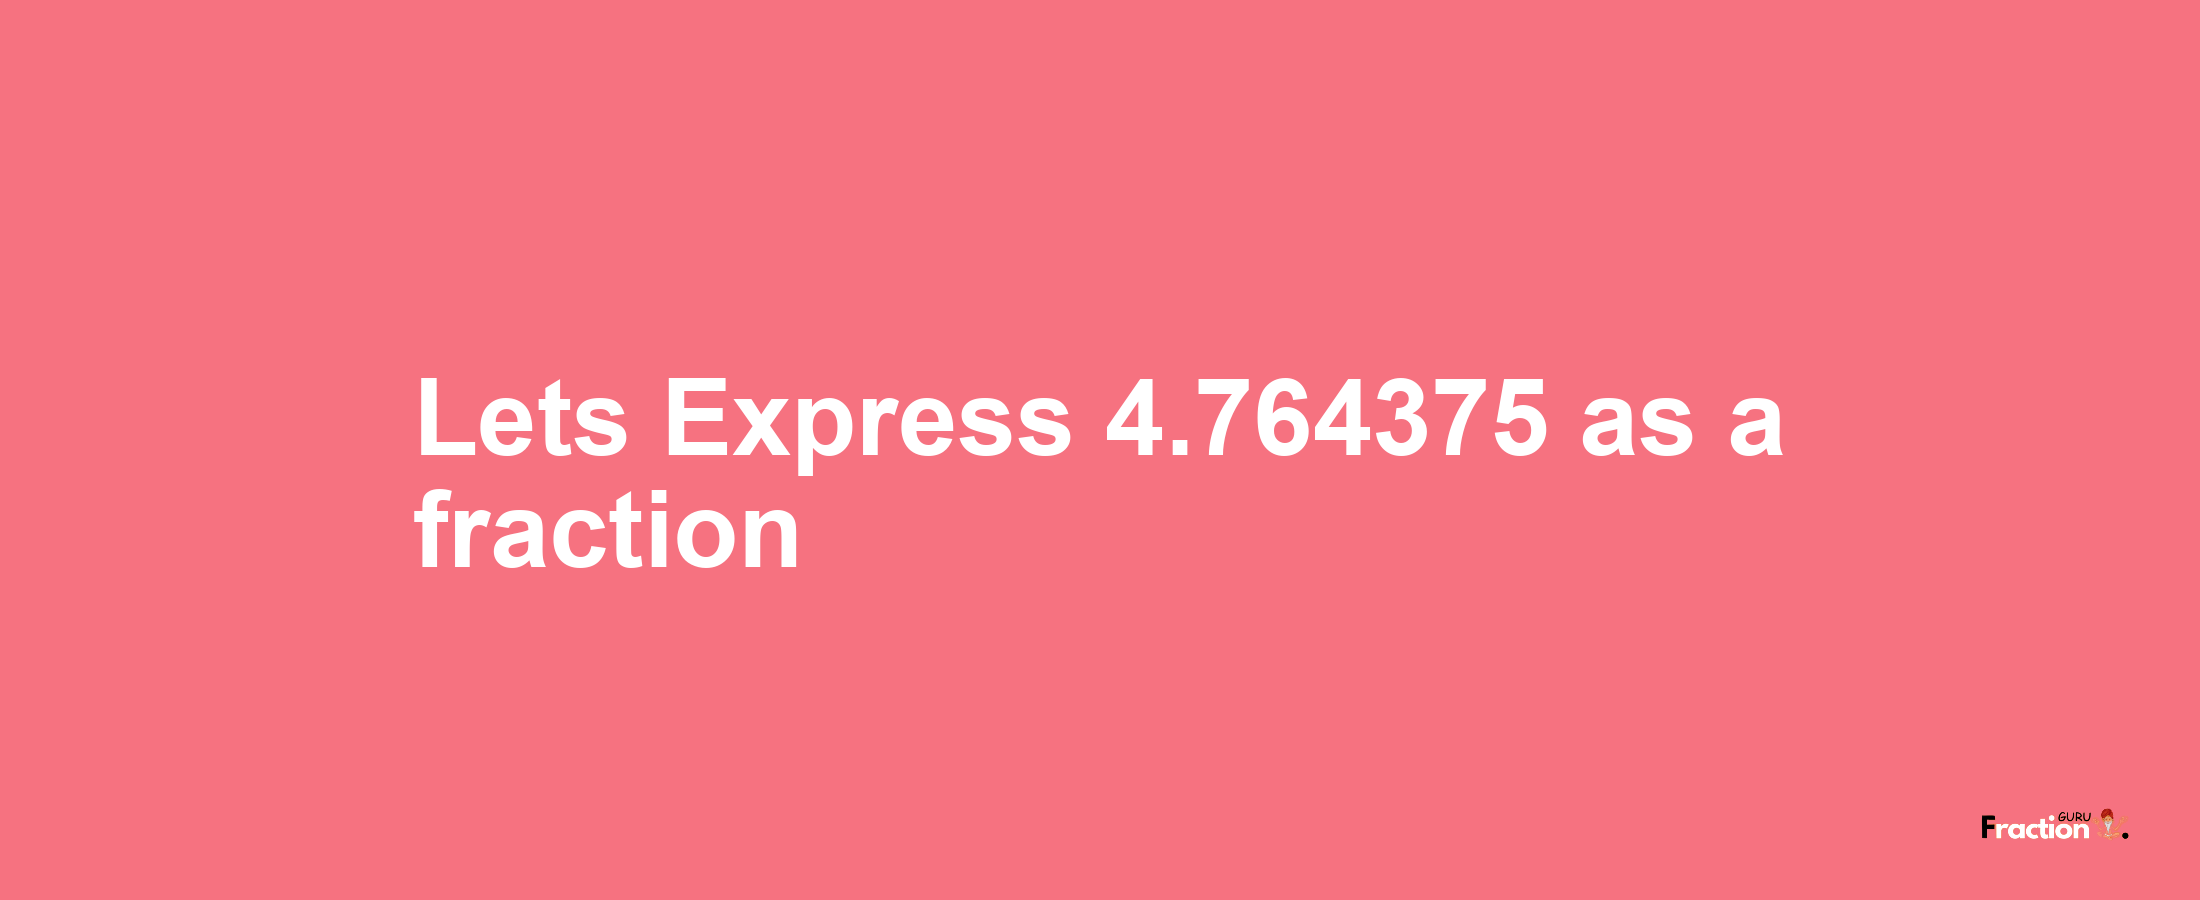 Lets Express 4.764375 as afraction